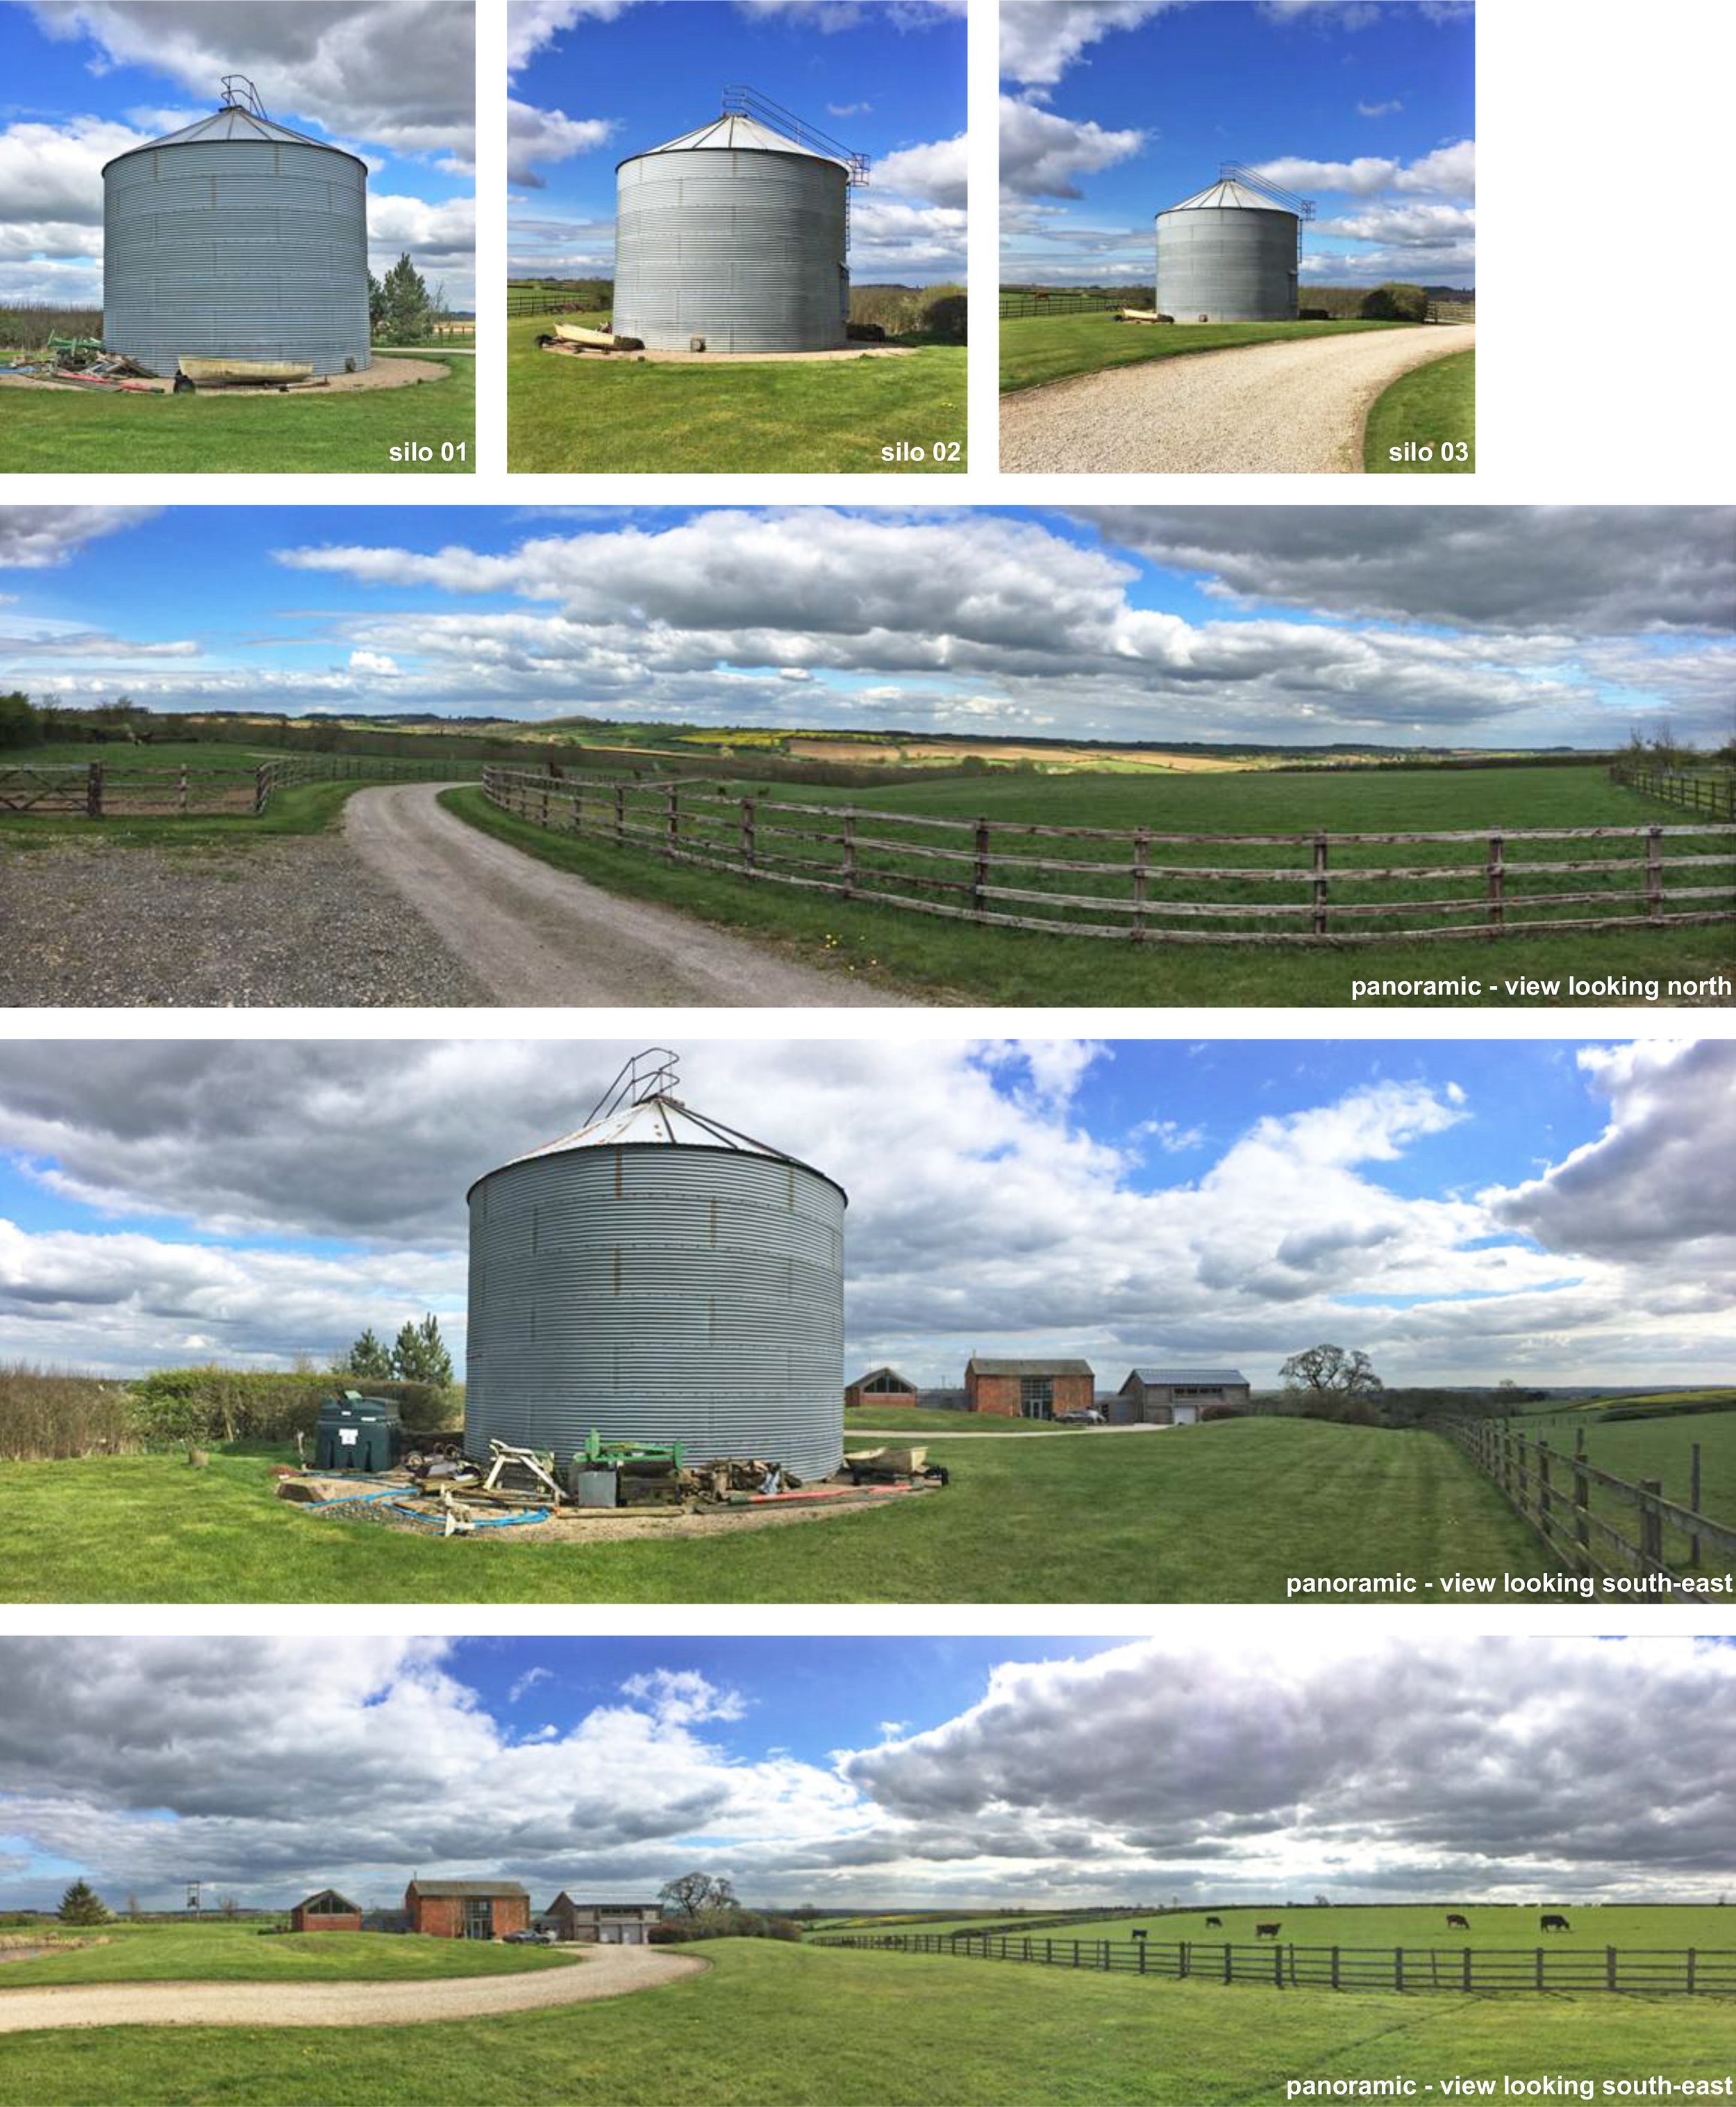 Planning - Silo conversion Existing site photos and views.jpg